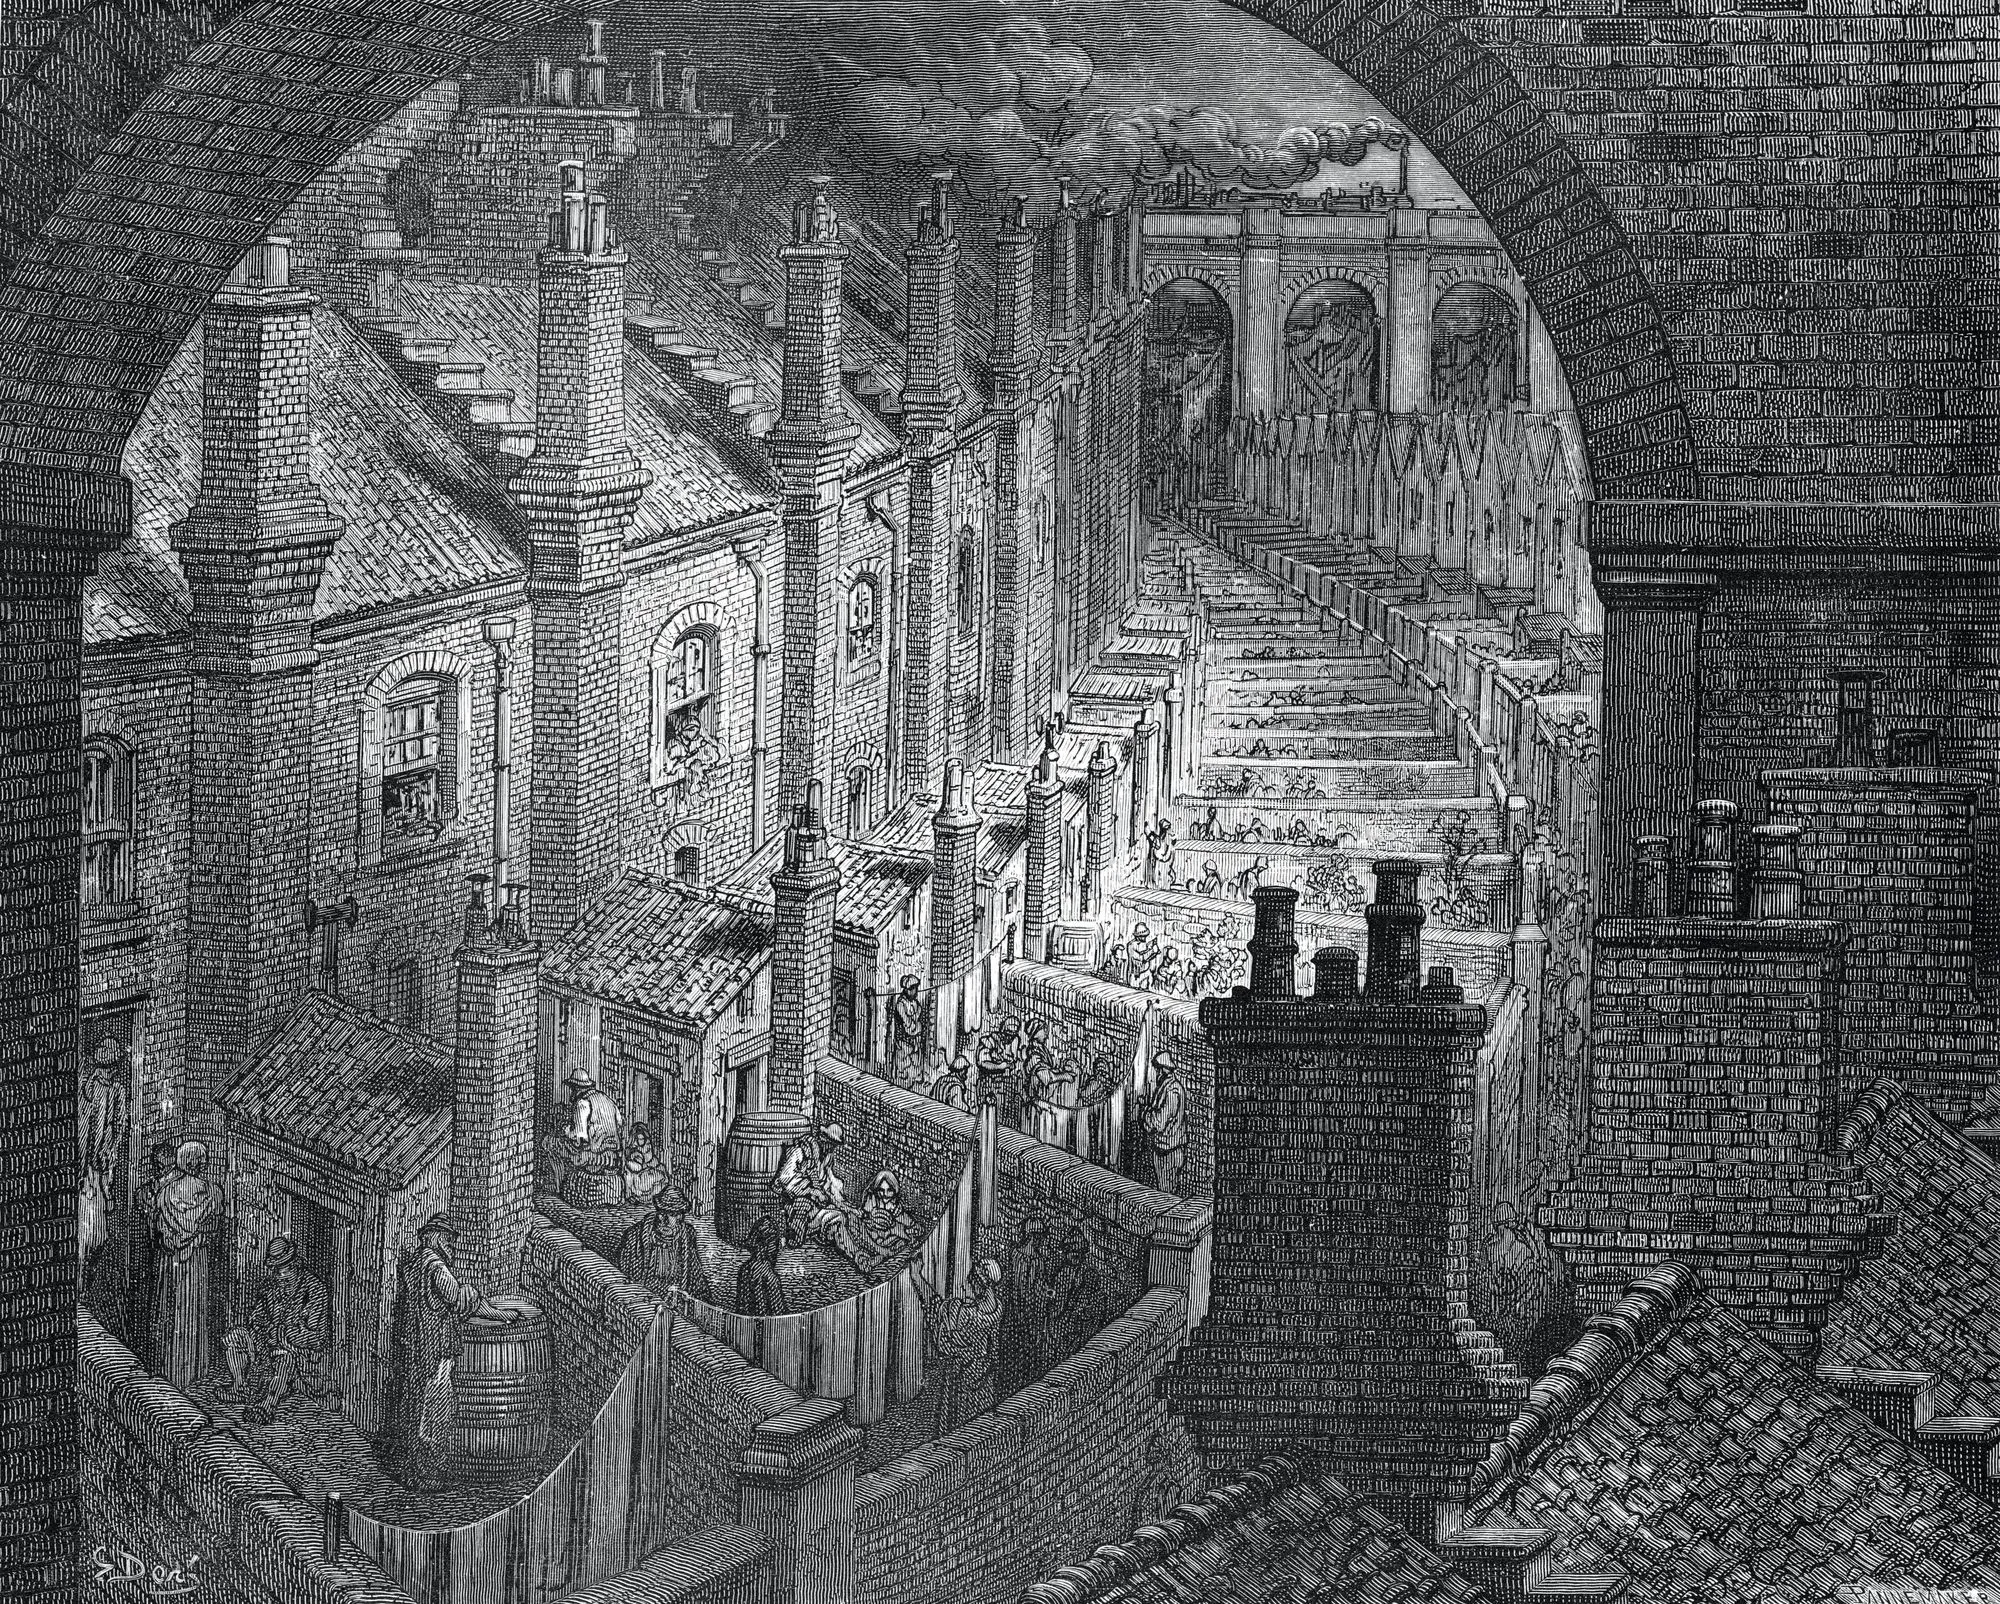 Over London by Rail, Gustave Doré, 1872.